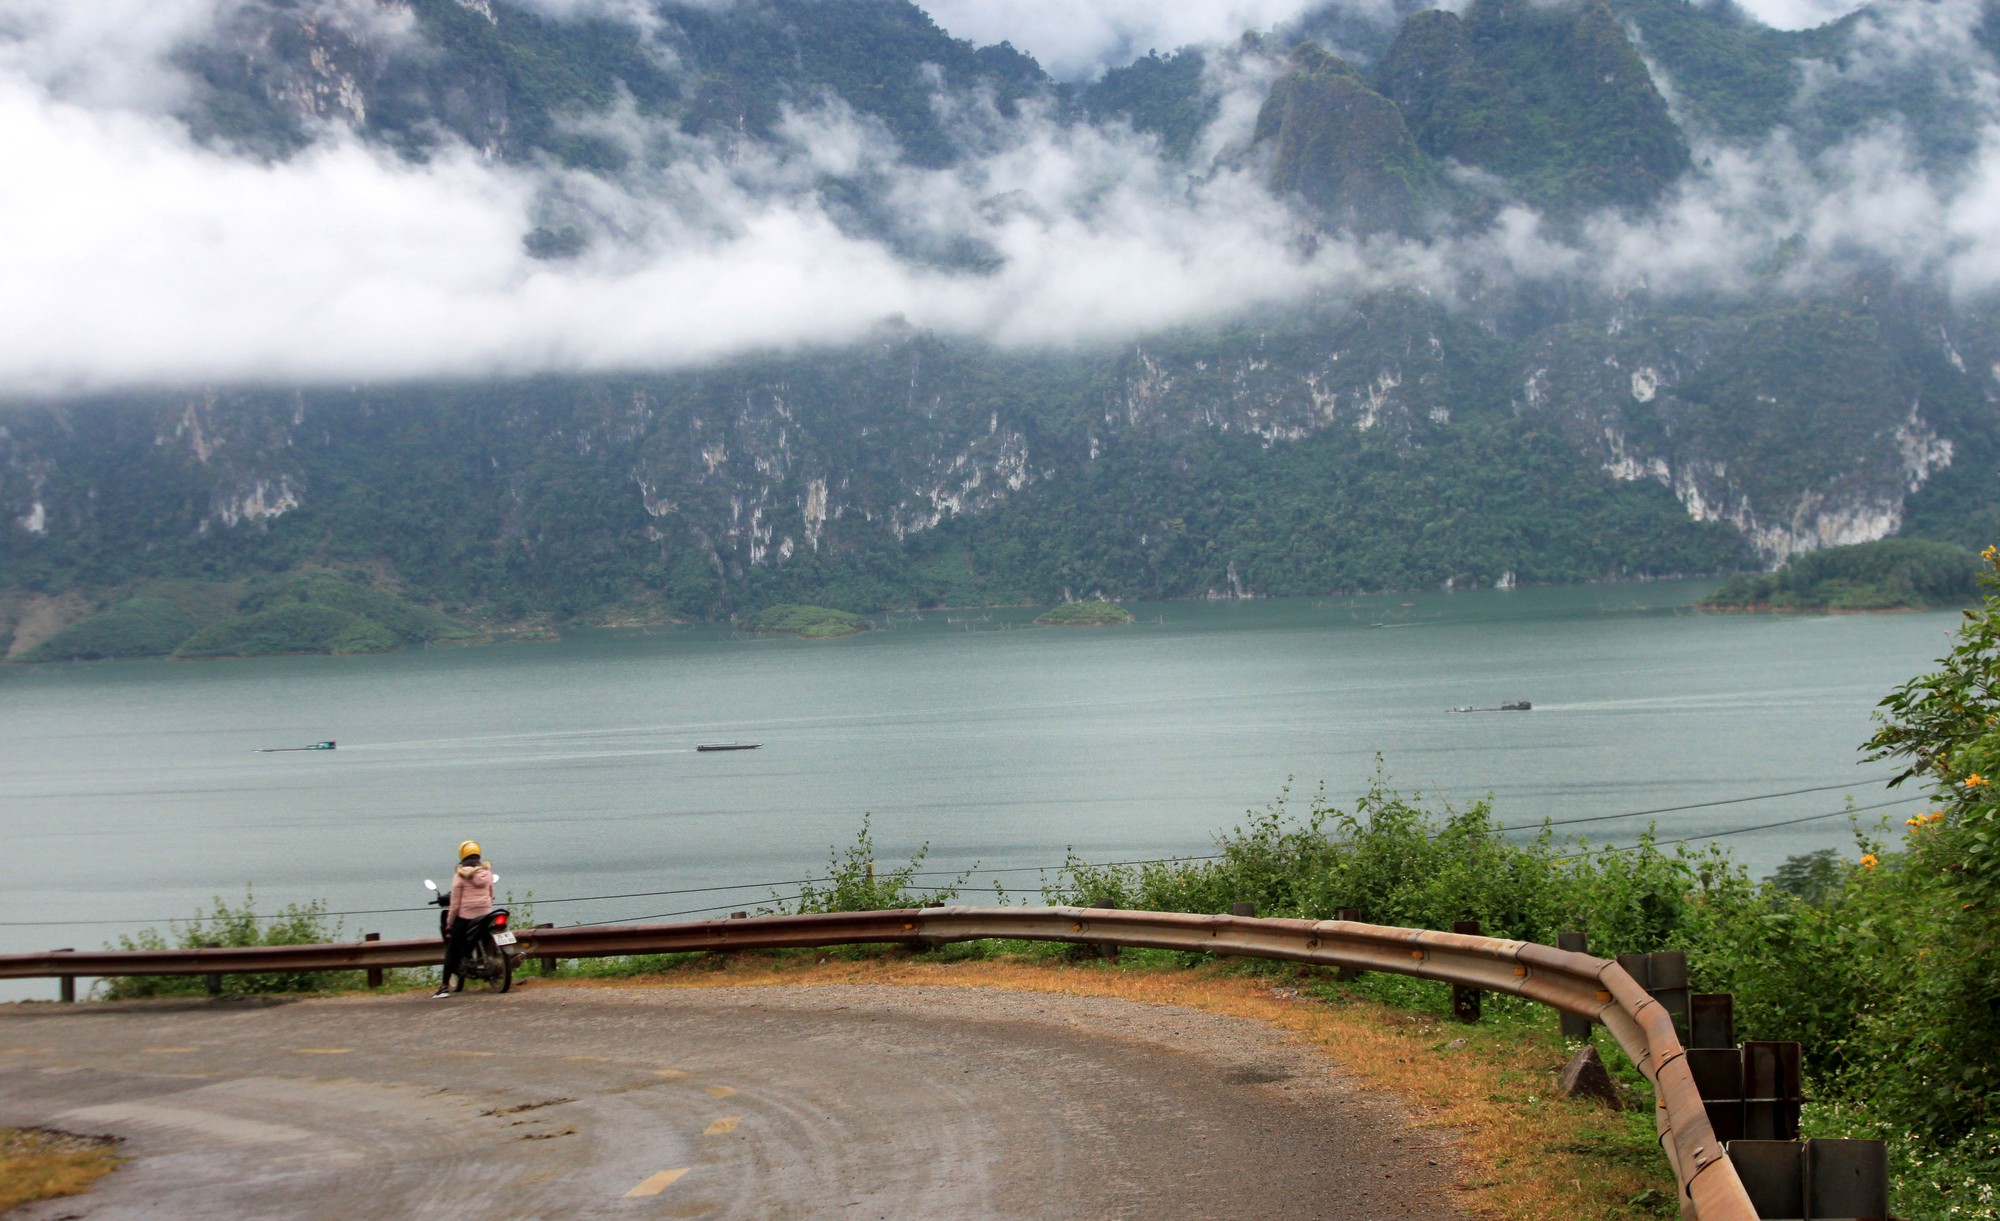 Clouds reside on the mountains surrounding the well-known Da River. Photo: Thu Hue